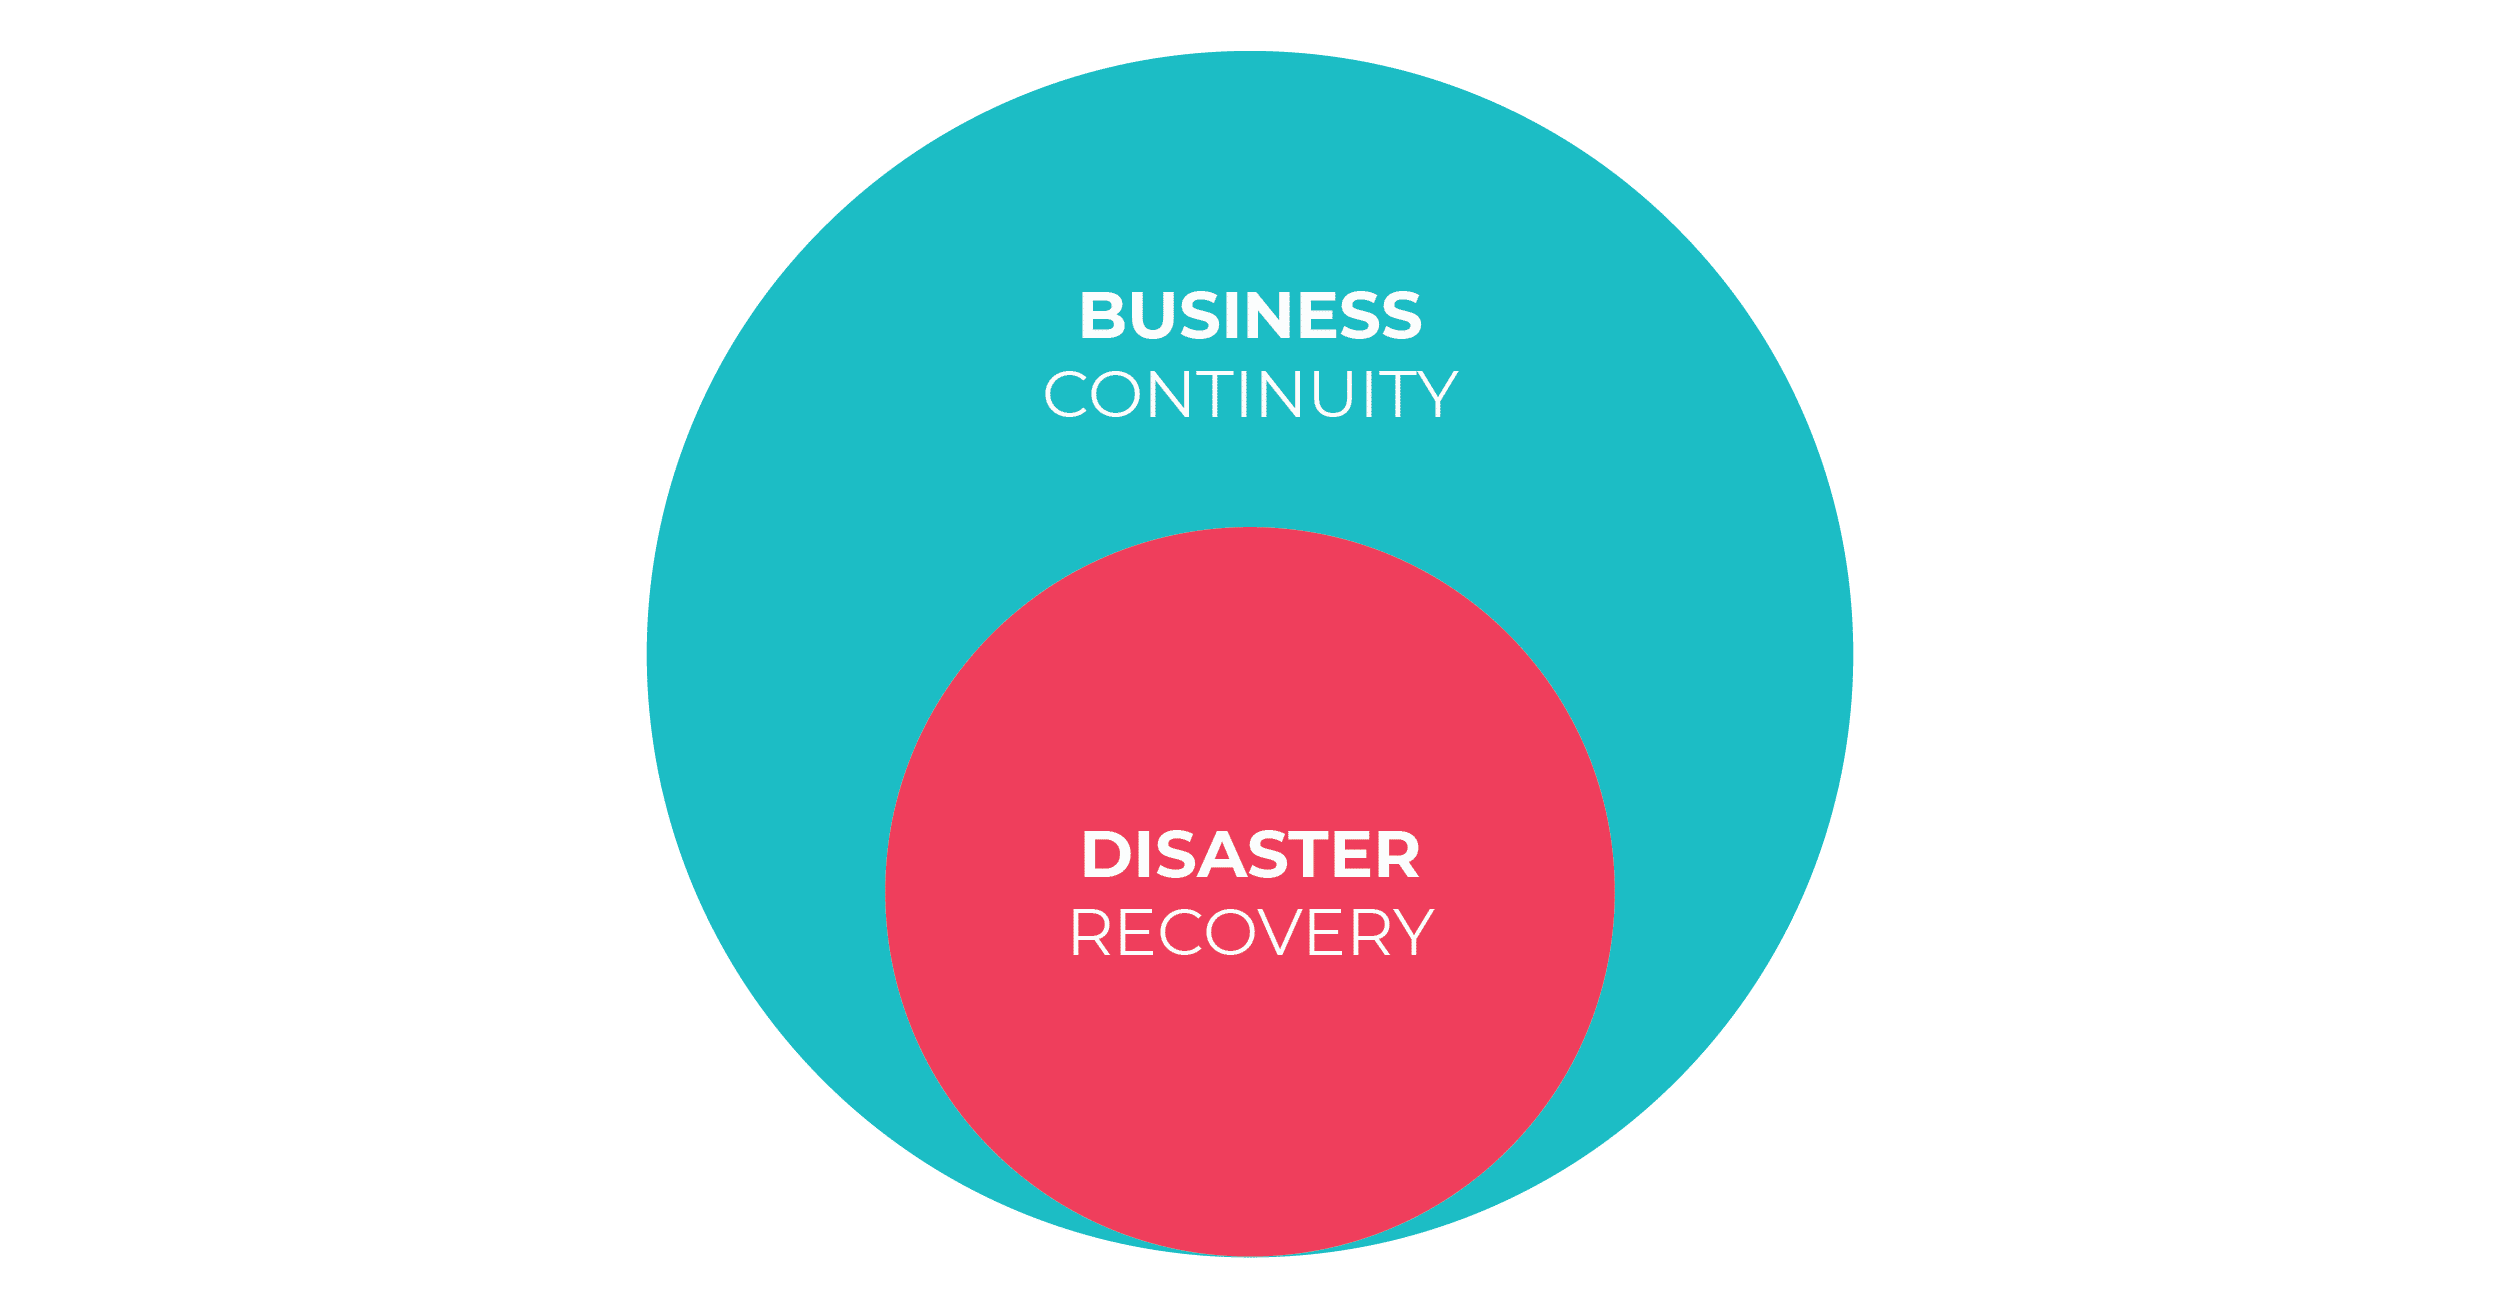 Business continuity and disaster recovery